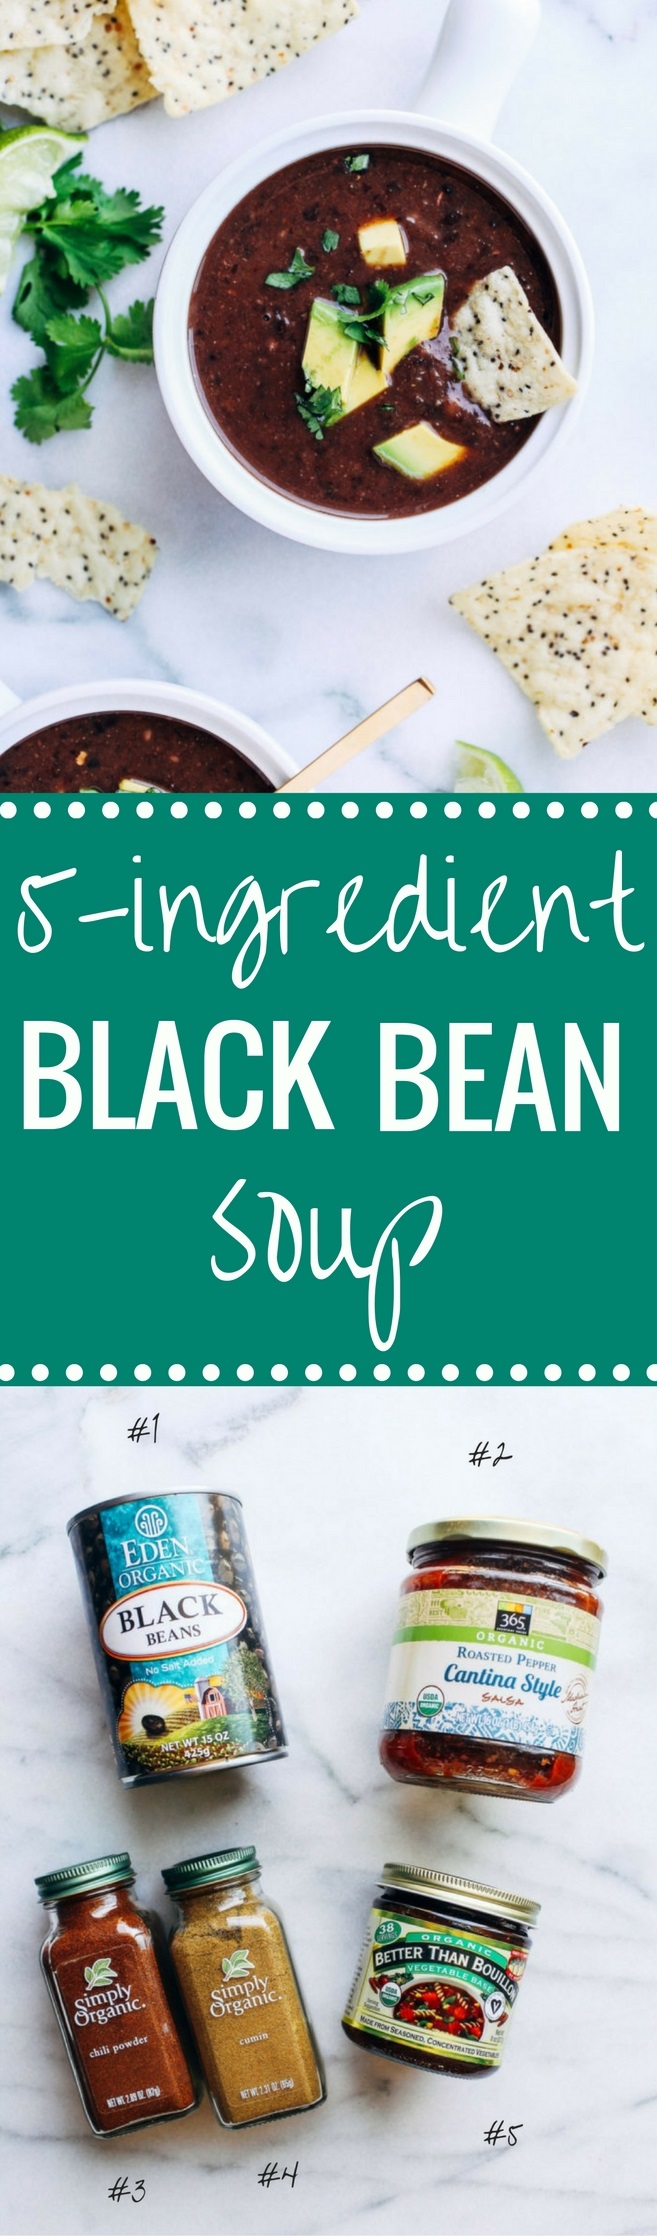 5-Ingredient Black Bean Soup- you won’t believe how easy this soup is to make! Just 15 minutes is all you need for a quick and healthy meal that’s packed full of protein and antioxidants! (vegan + gluten-free)